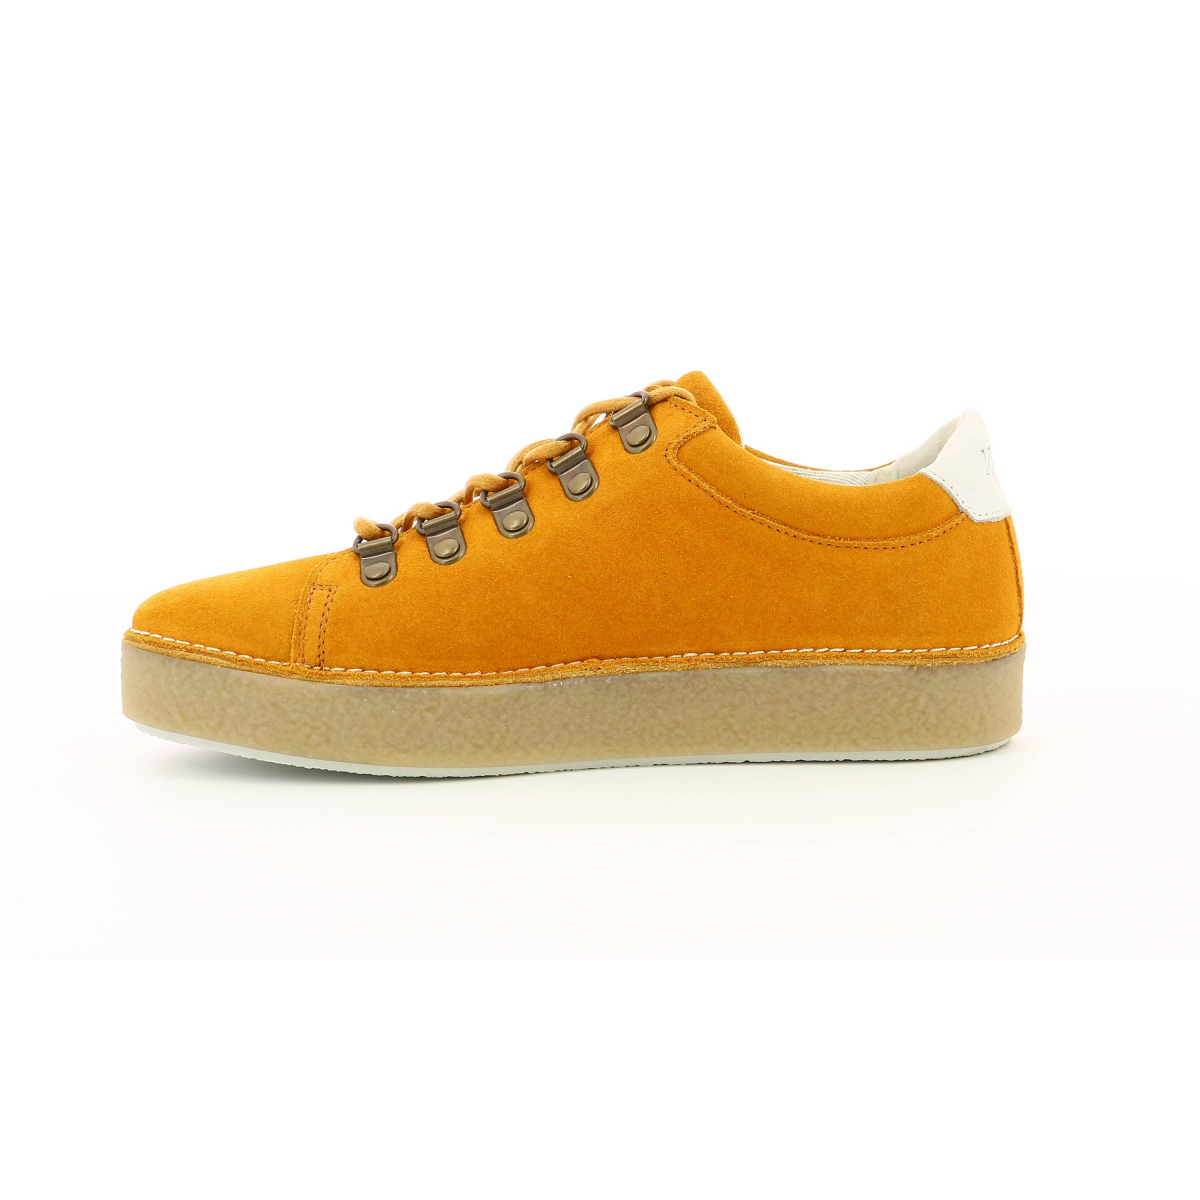 Women's low sneakers Sprite yellow and ocher - shoes for women - Kickers